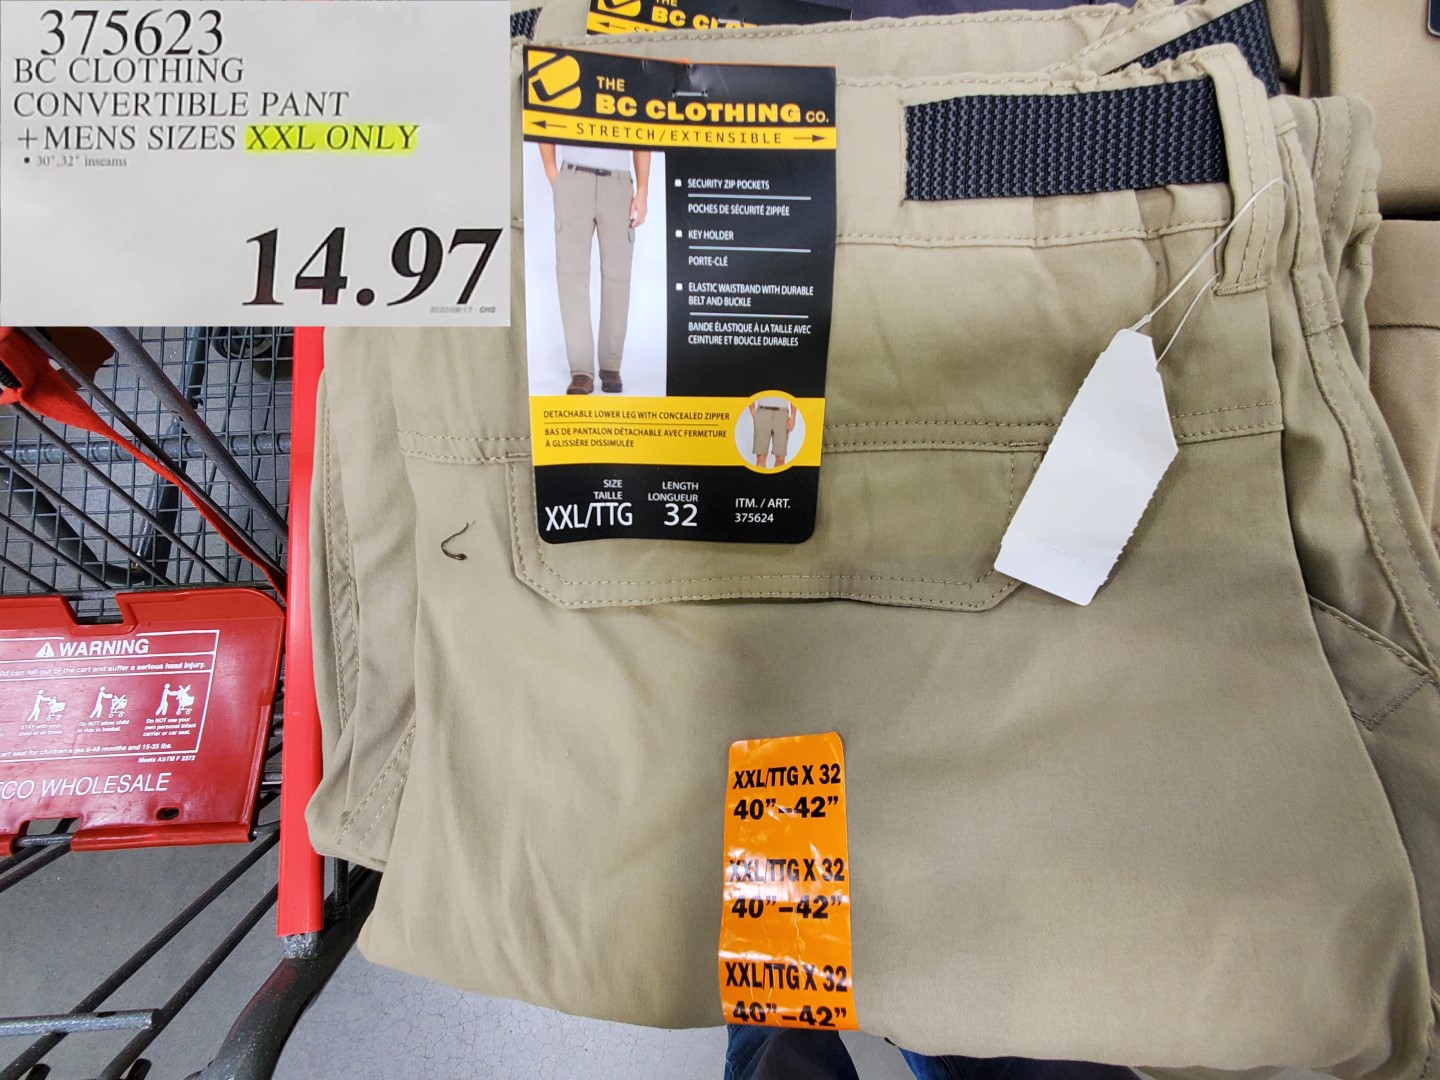 375623 BC CLOTHING CONVERTIBLE PANT MENS SIZES XXL ONLY 14 97 - Costco East  Fan Blog